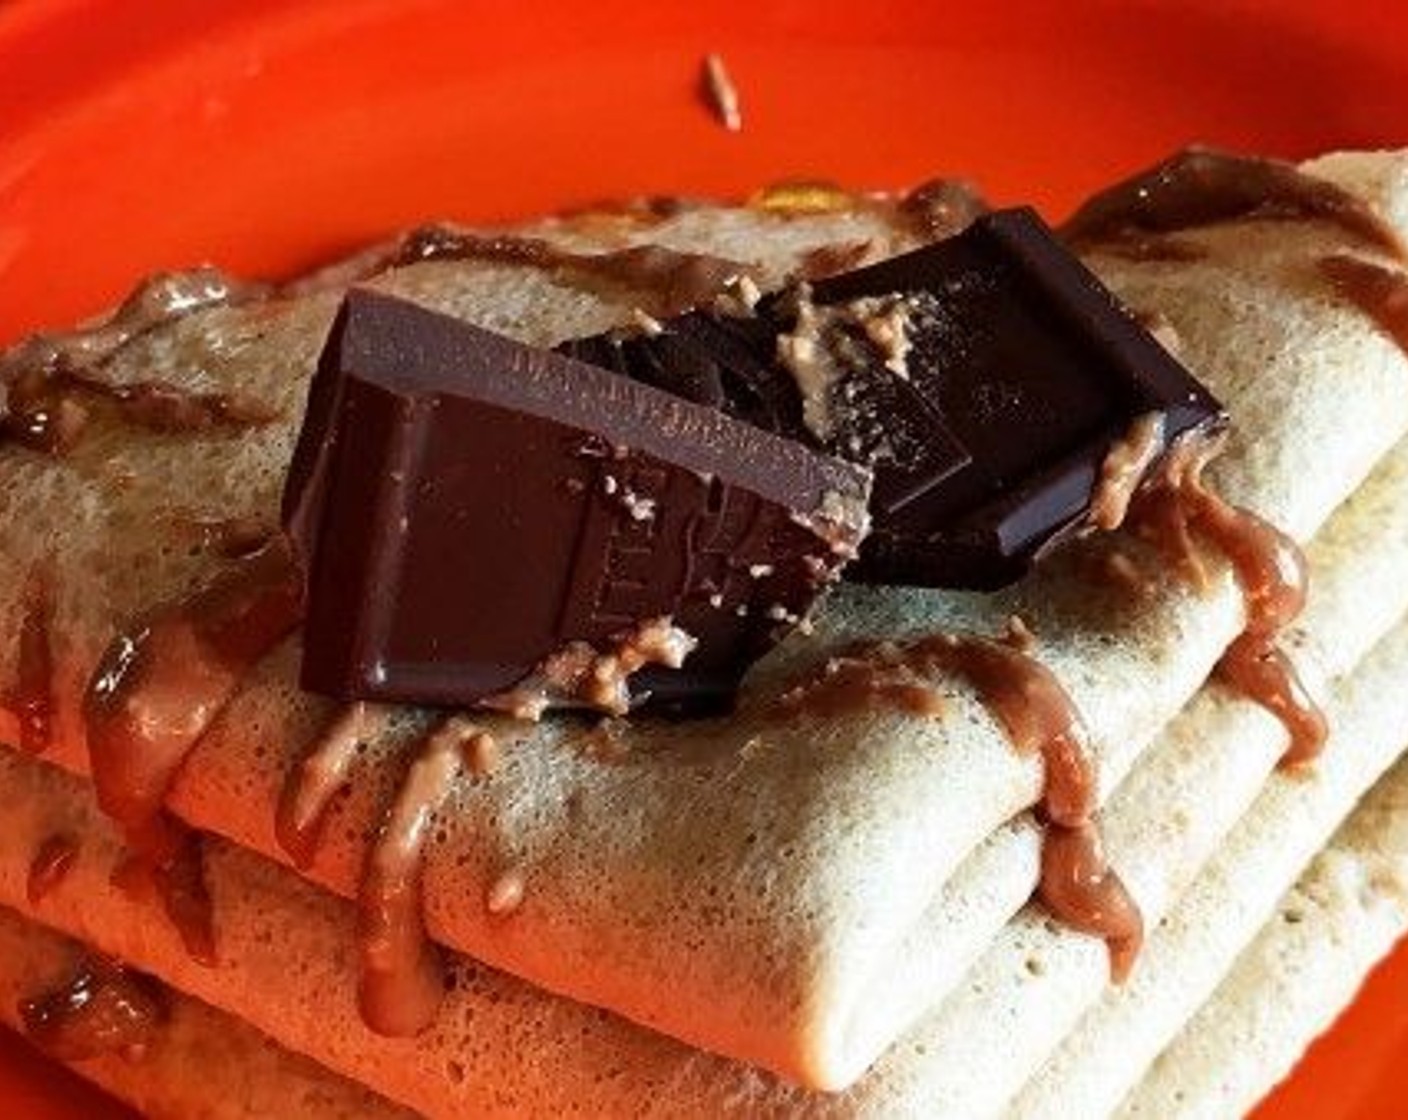 step 5 Fold each crepe, pile them up, drizzle with more Chocolate hazelnut spread, 1 tablespoon of maple syrup, dark chocolate pieces or whatever else you fancy. Serve it up!